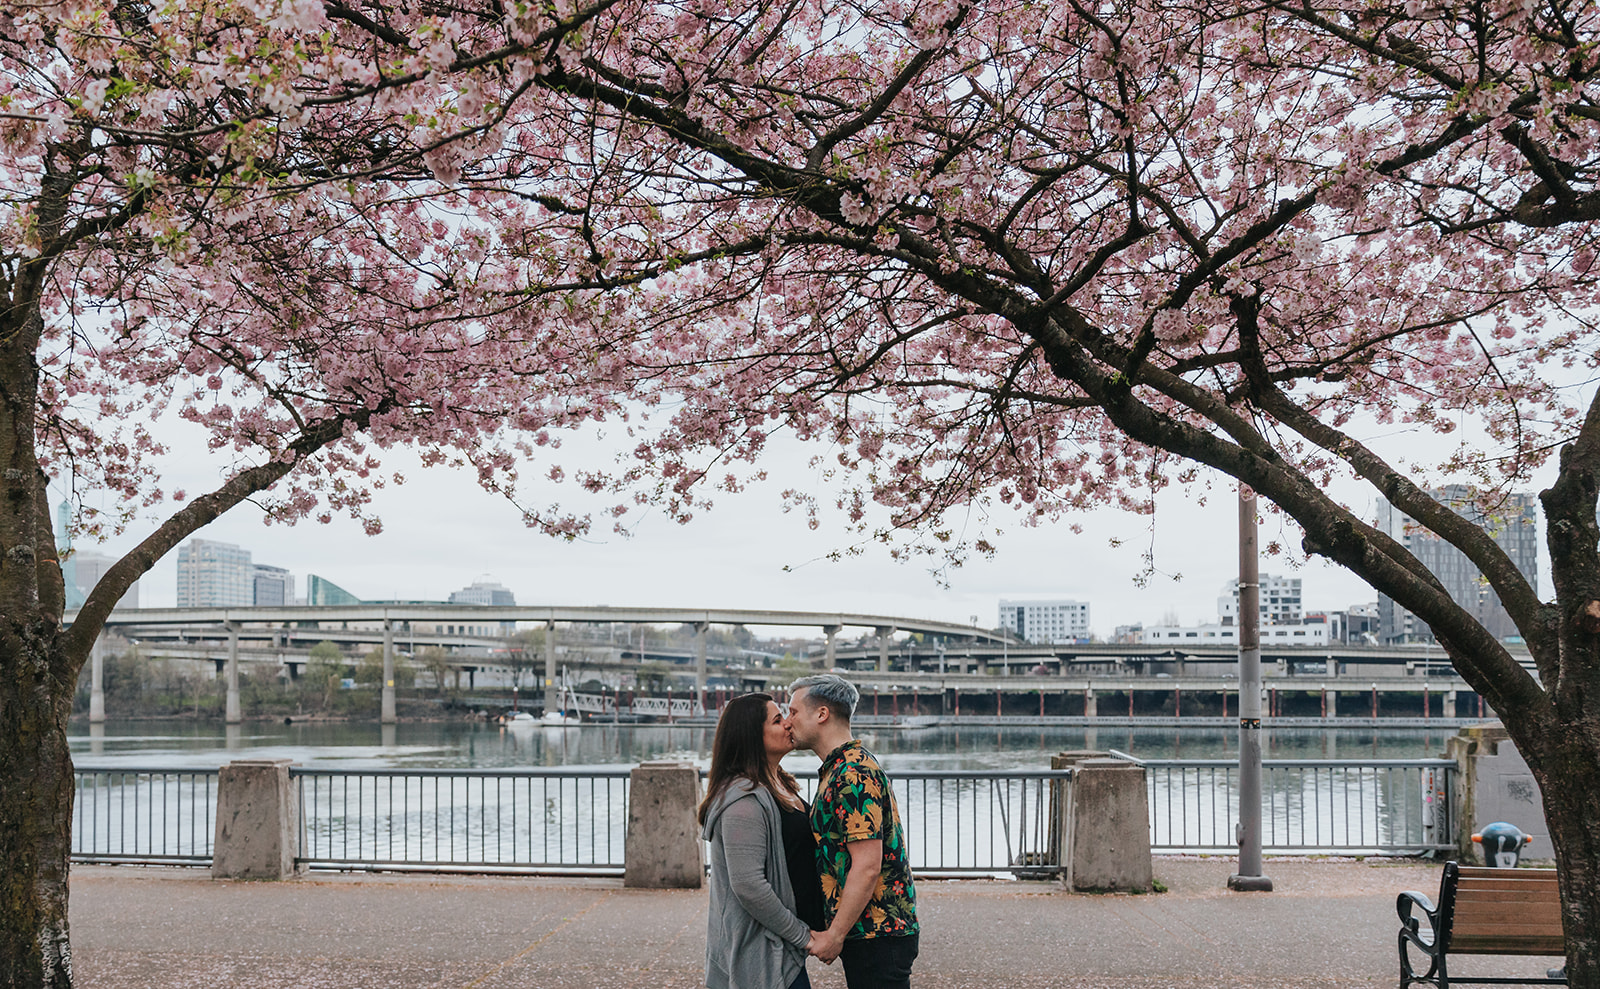 A couple kiss at Tom McCall Waterfront Park in Portland, Oregon below cherry blossom trees. This is a popular Portland engagement photo location.